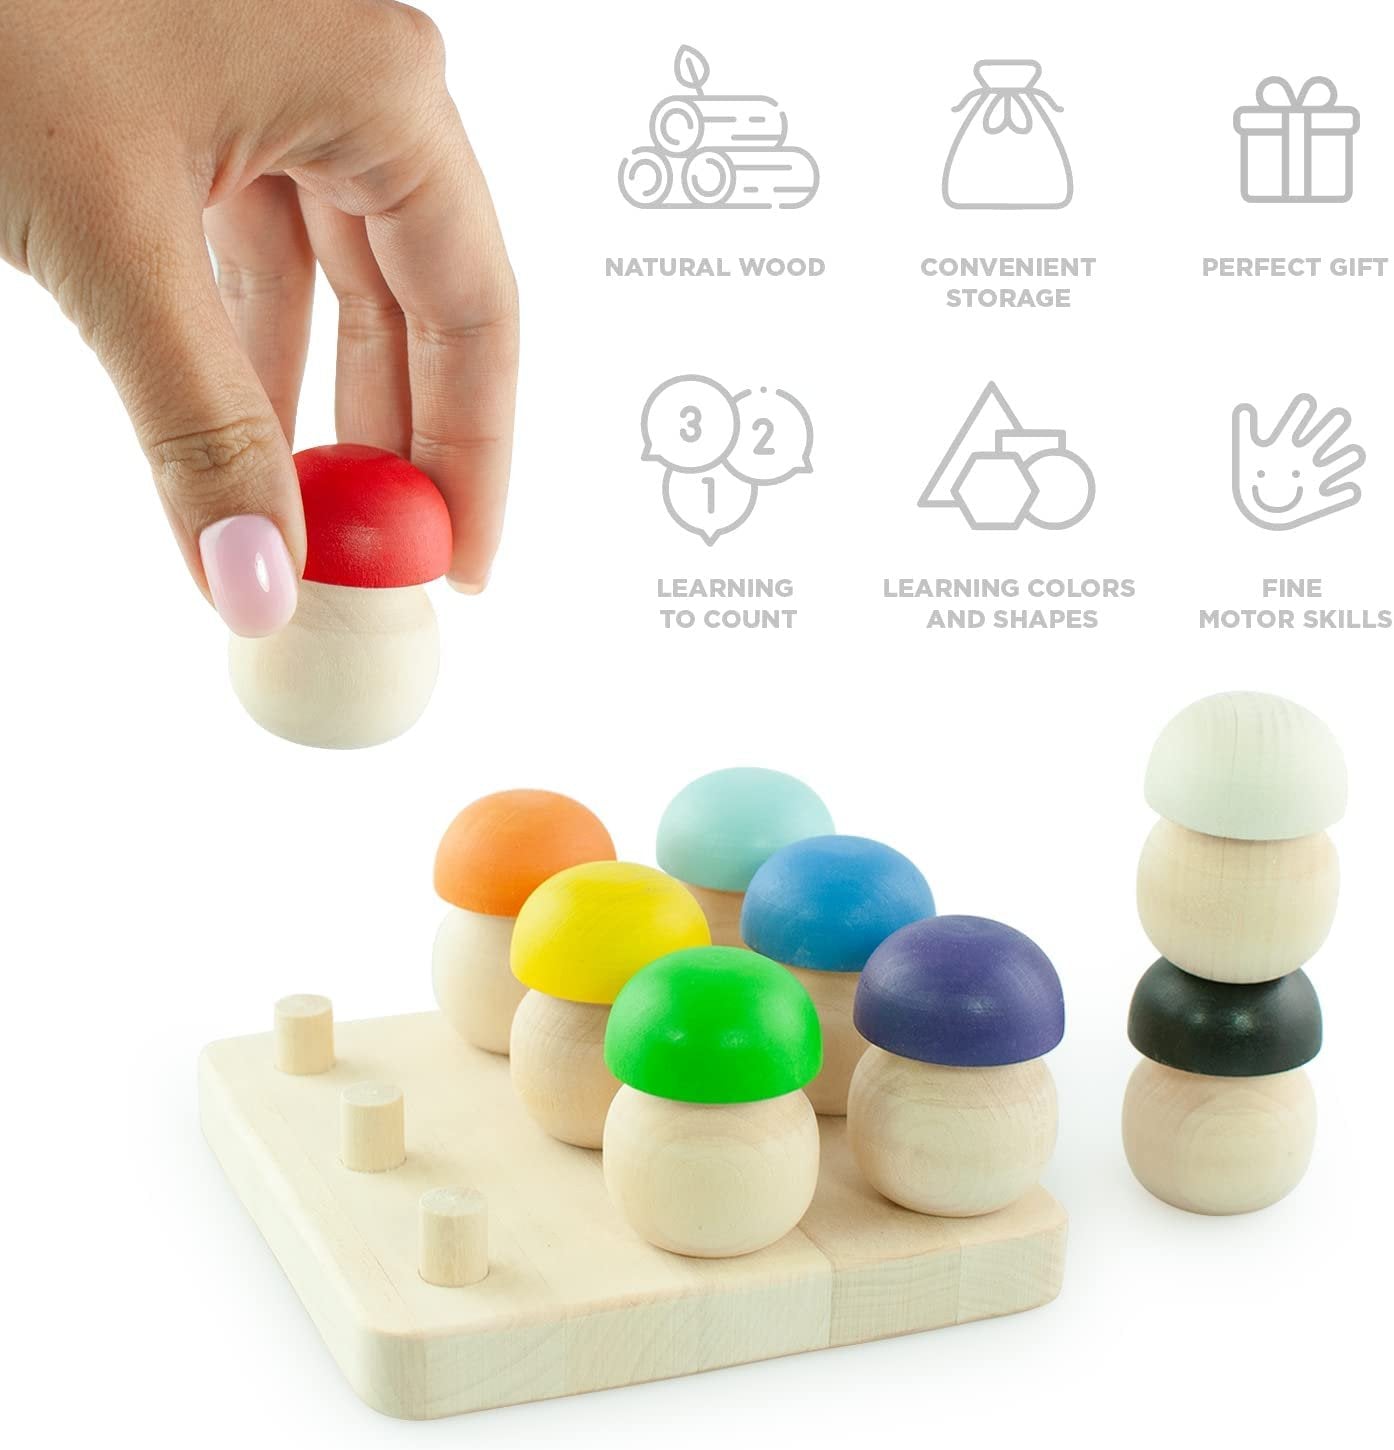 Ulanik Mushroom Glade Toddler Montessori Toys for 3 Year Old + Kids Wooden Mushrooms Game for Learning Color Sorting and Counting